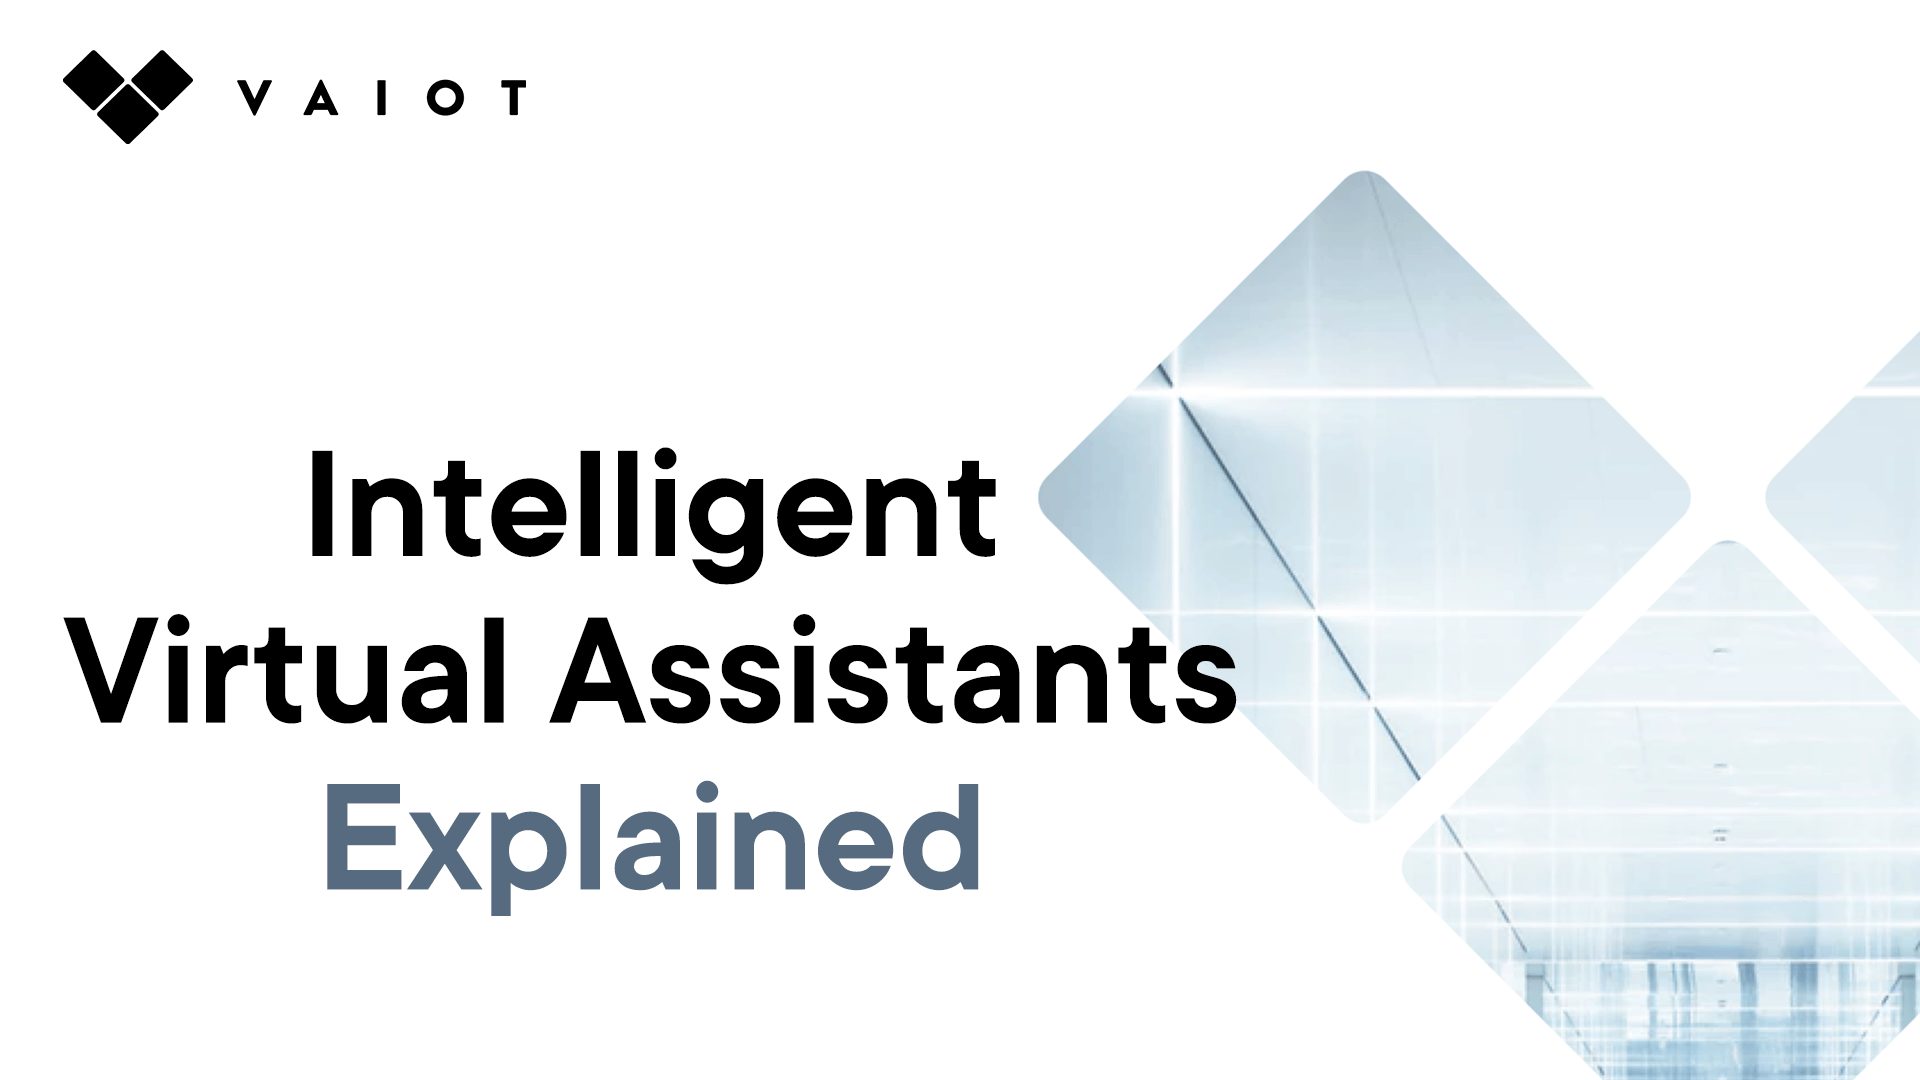 Intelligent Virtual Assistants by VAIOT